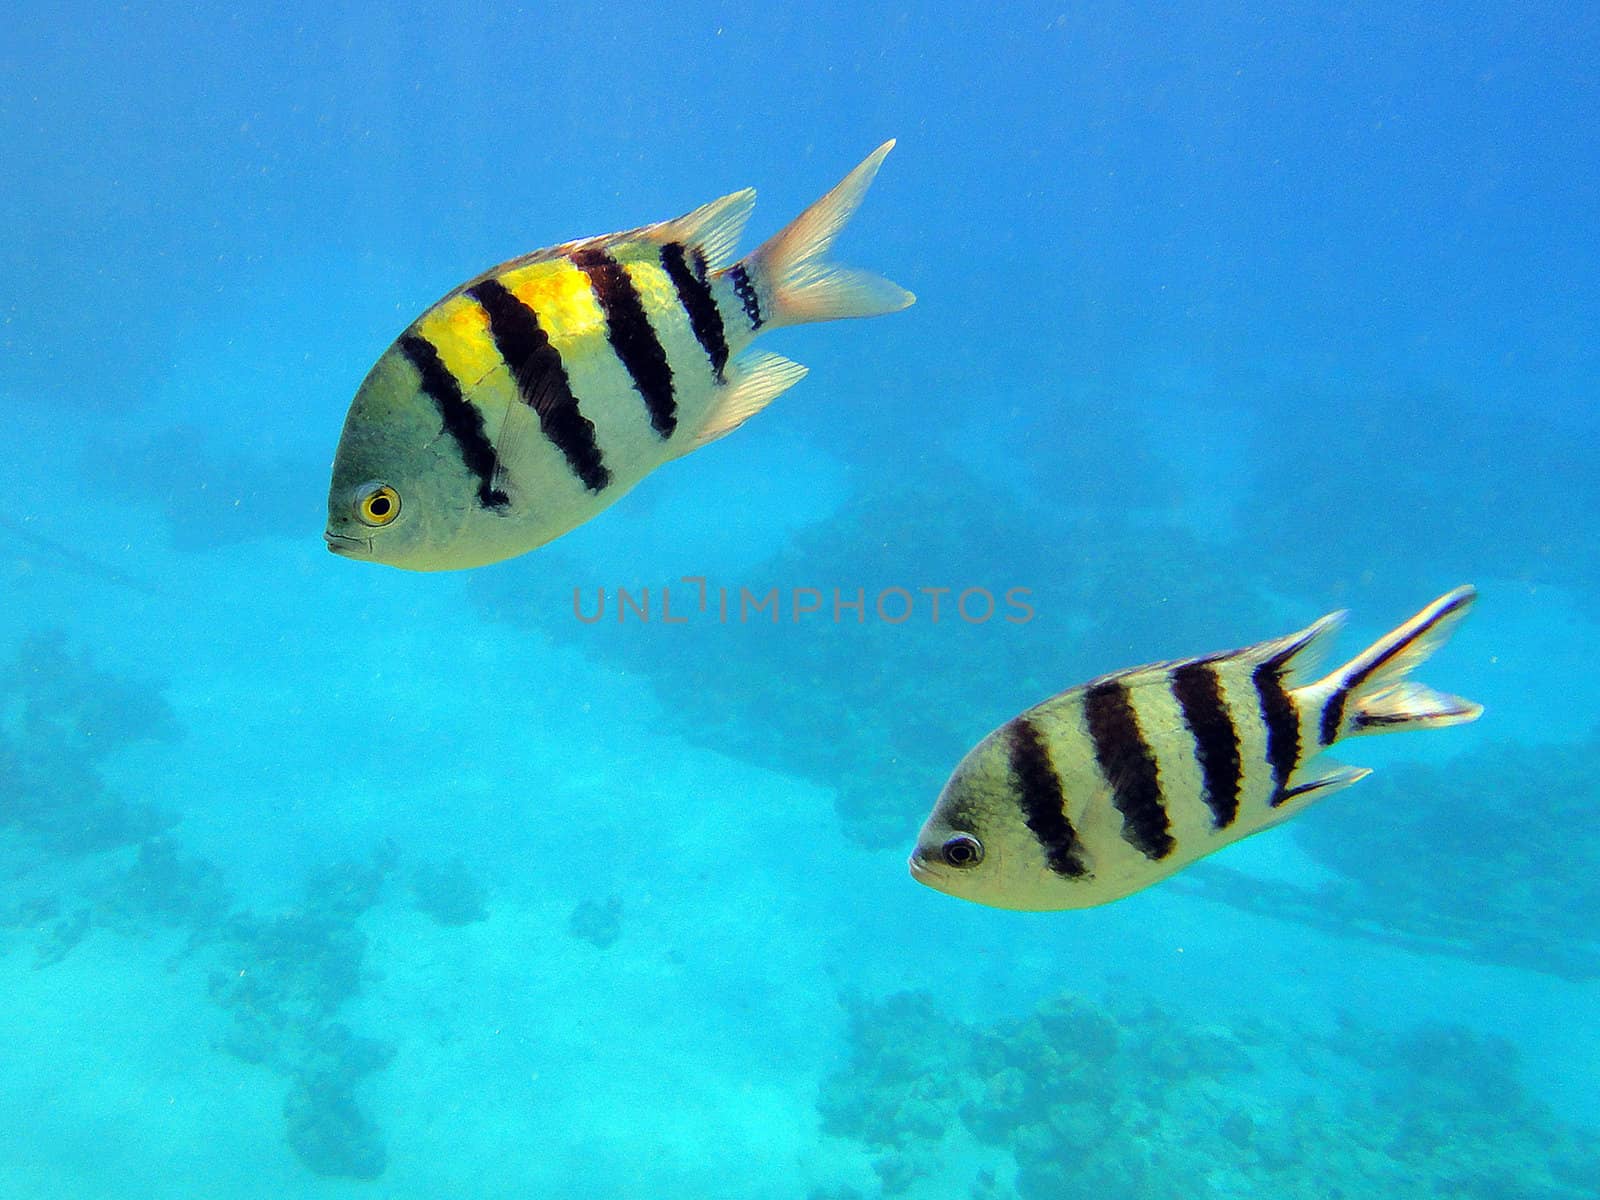 Striped fish by georg777